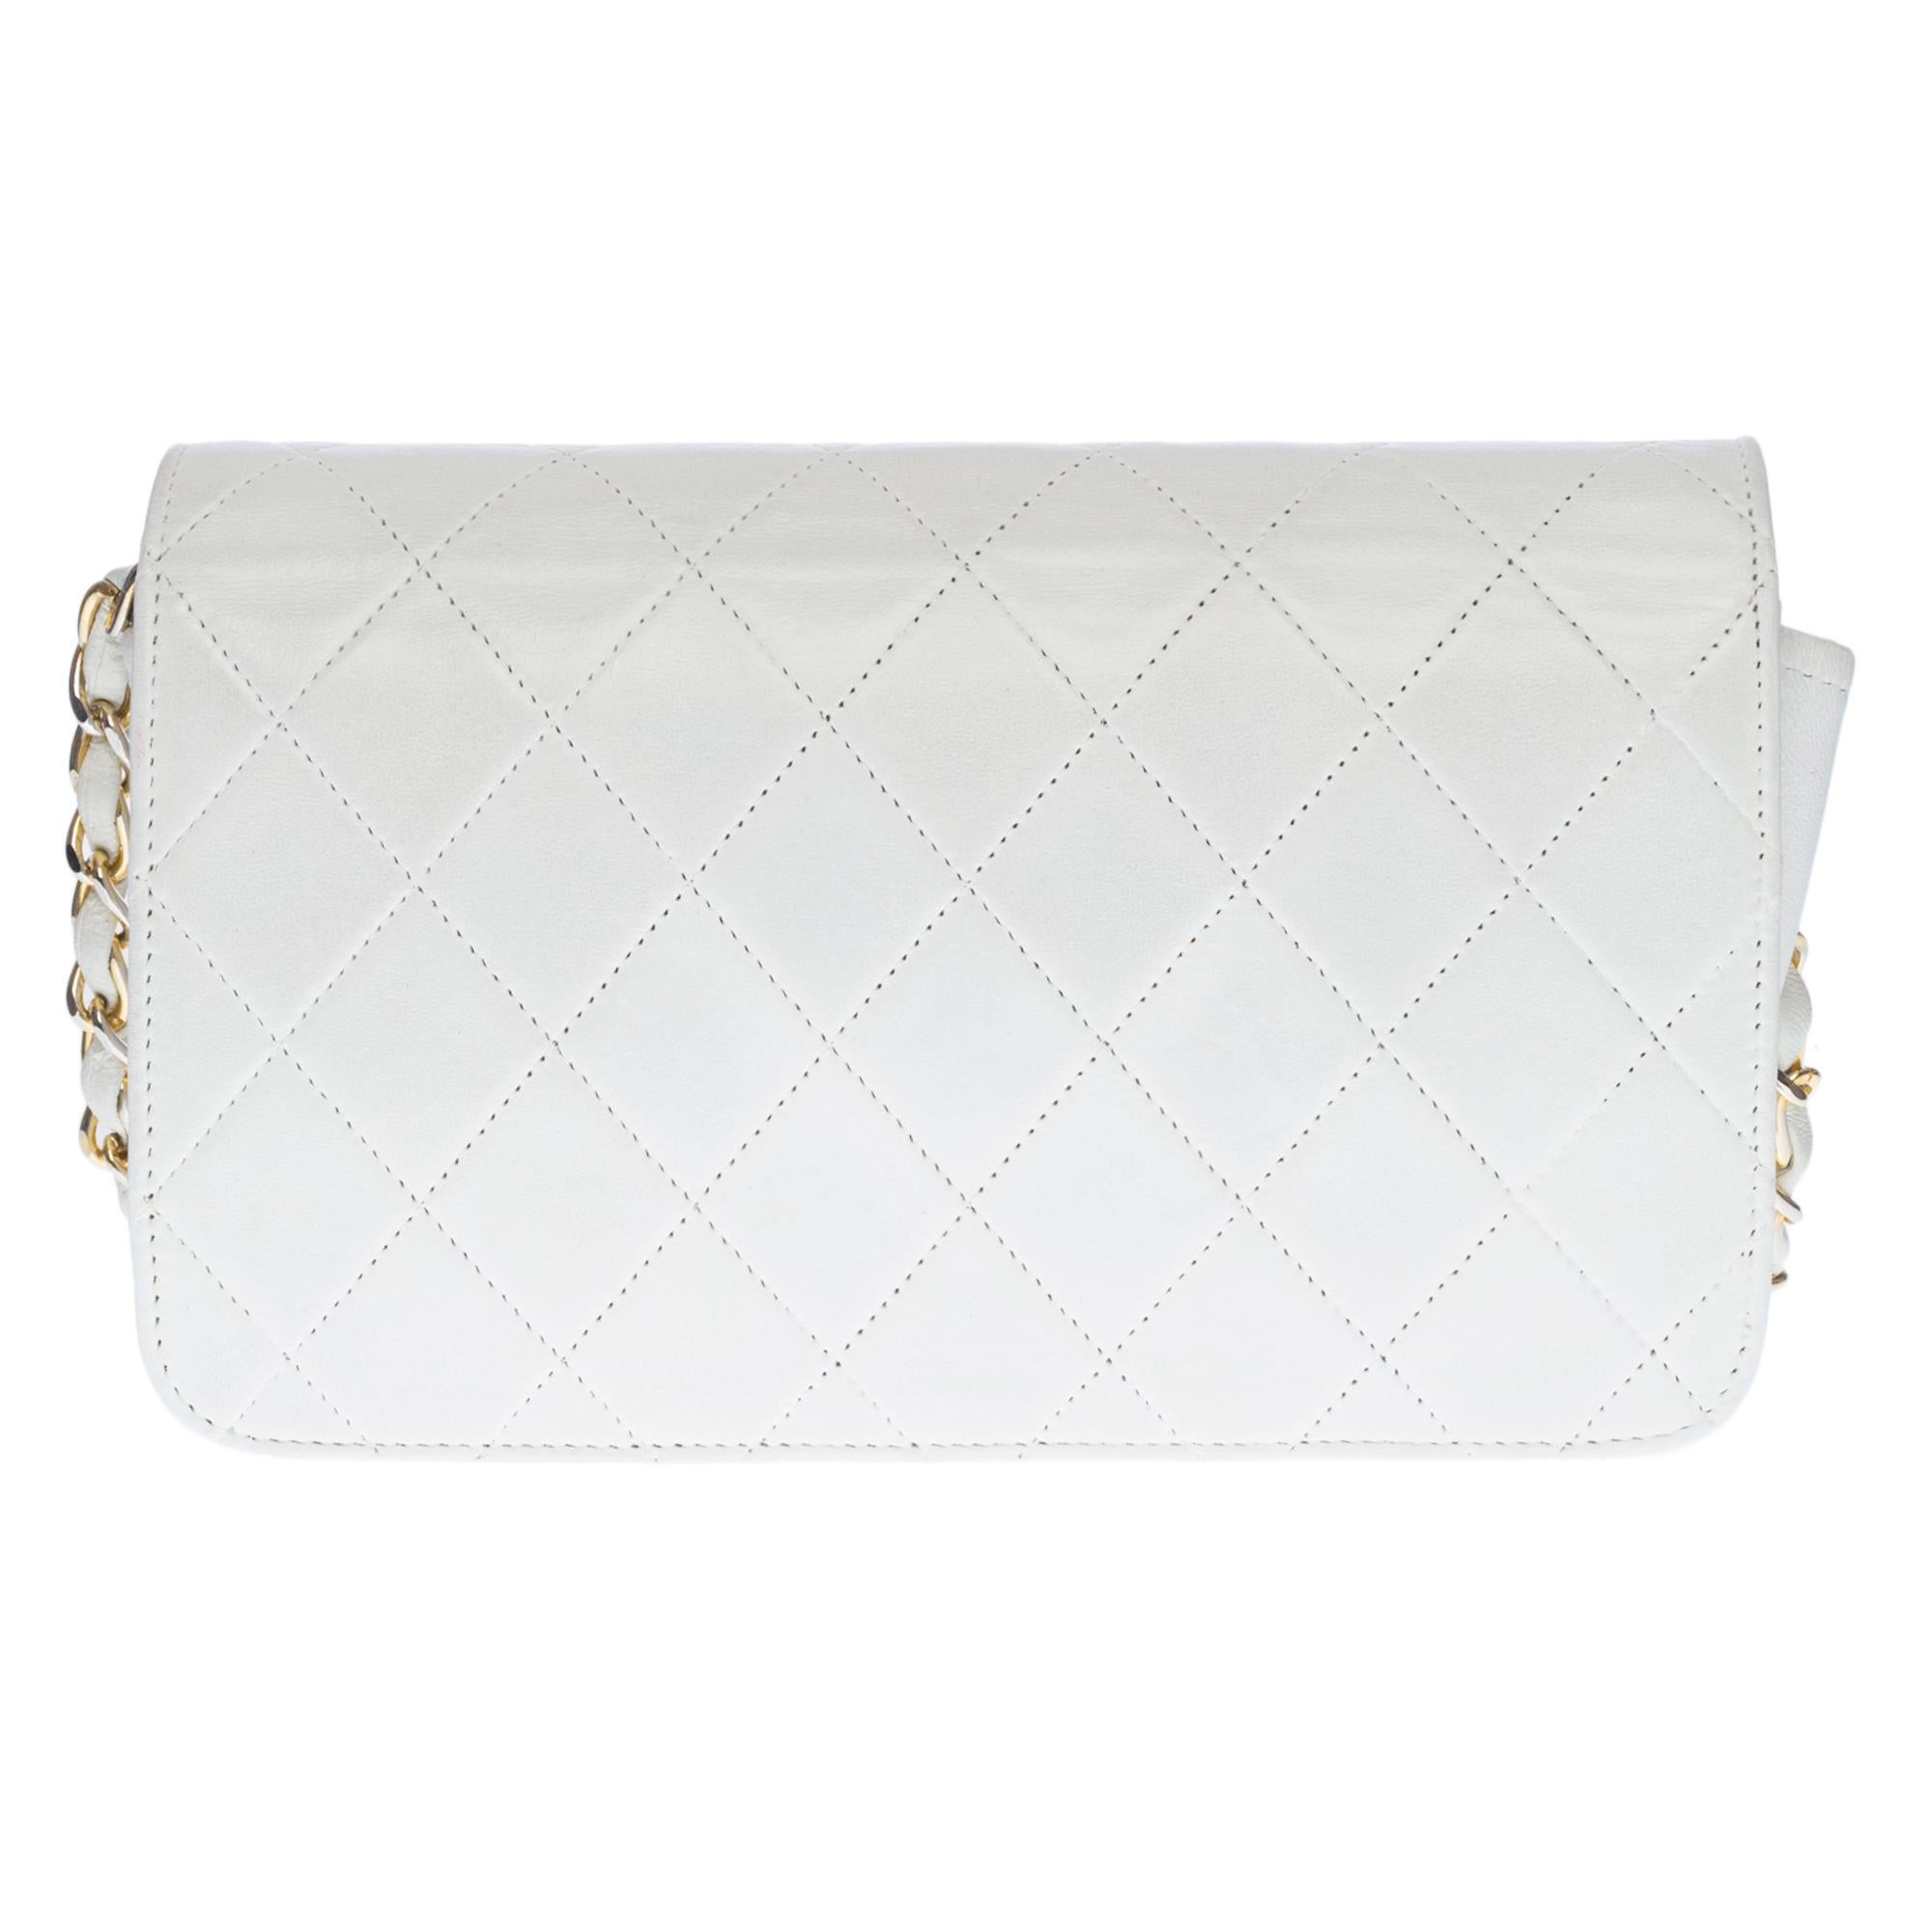 Lovely mini Chanel Full flap handbag in white quilted lambskin, hardware in gold metal, one chain strap in gold metal interwoven with white leather allowing the bag to be worn on the shoulder


Flap closure, golden CC logo clasp
Lining in white